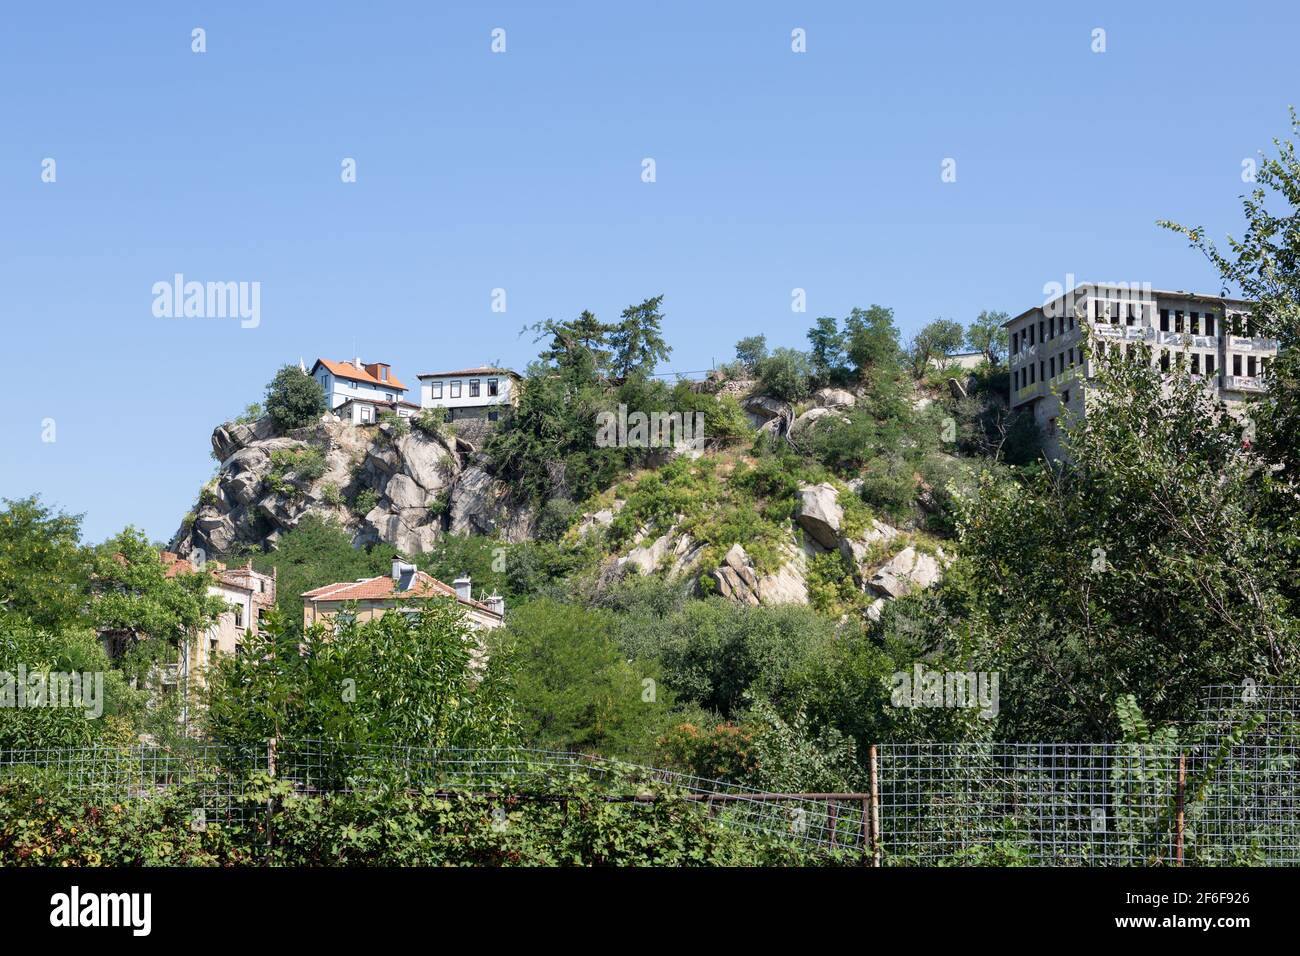 Looking up at a cliff-top building in Plovdiv Old Town, Bulgaria Stock Photo